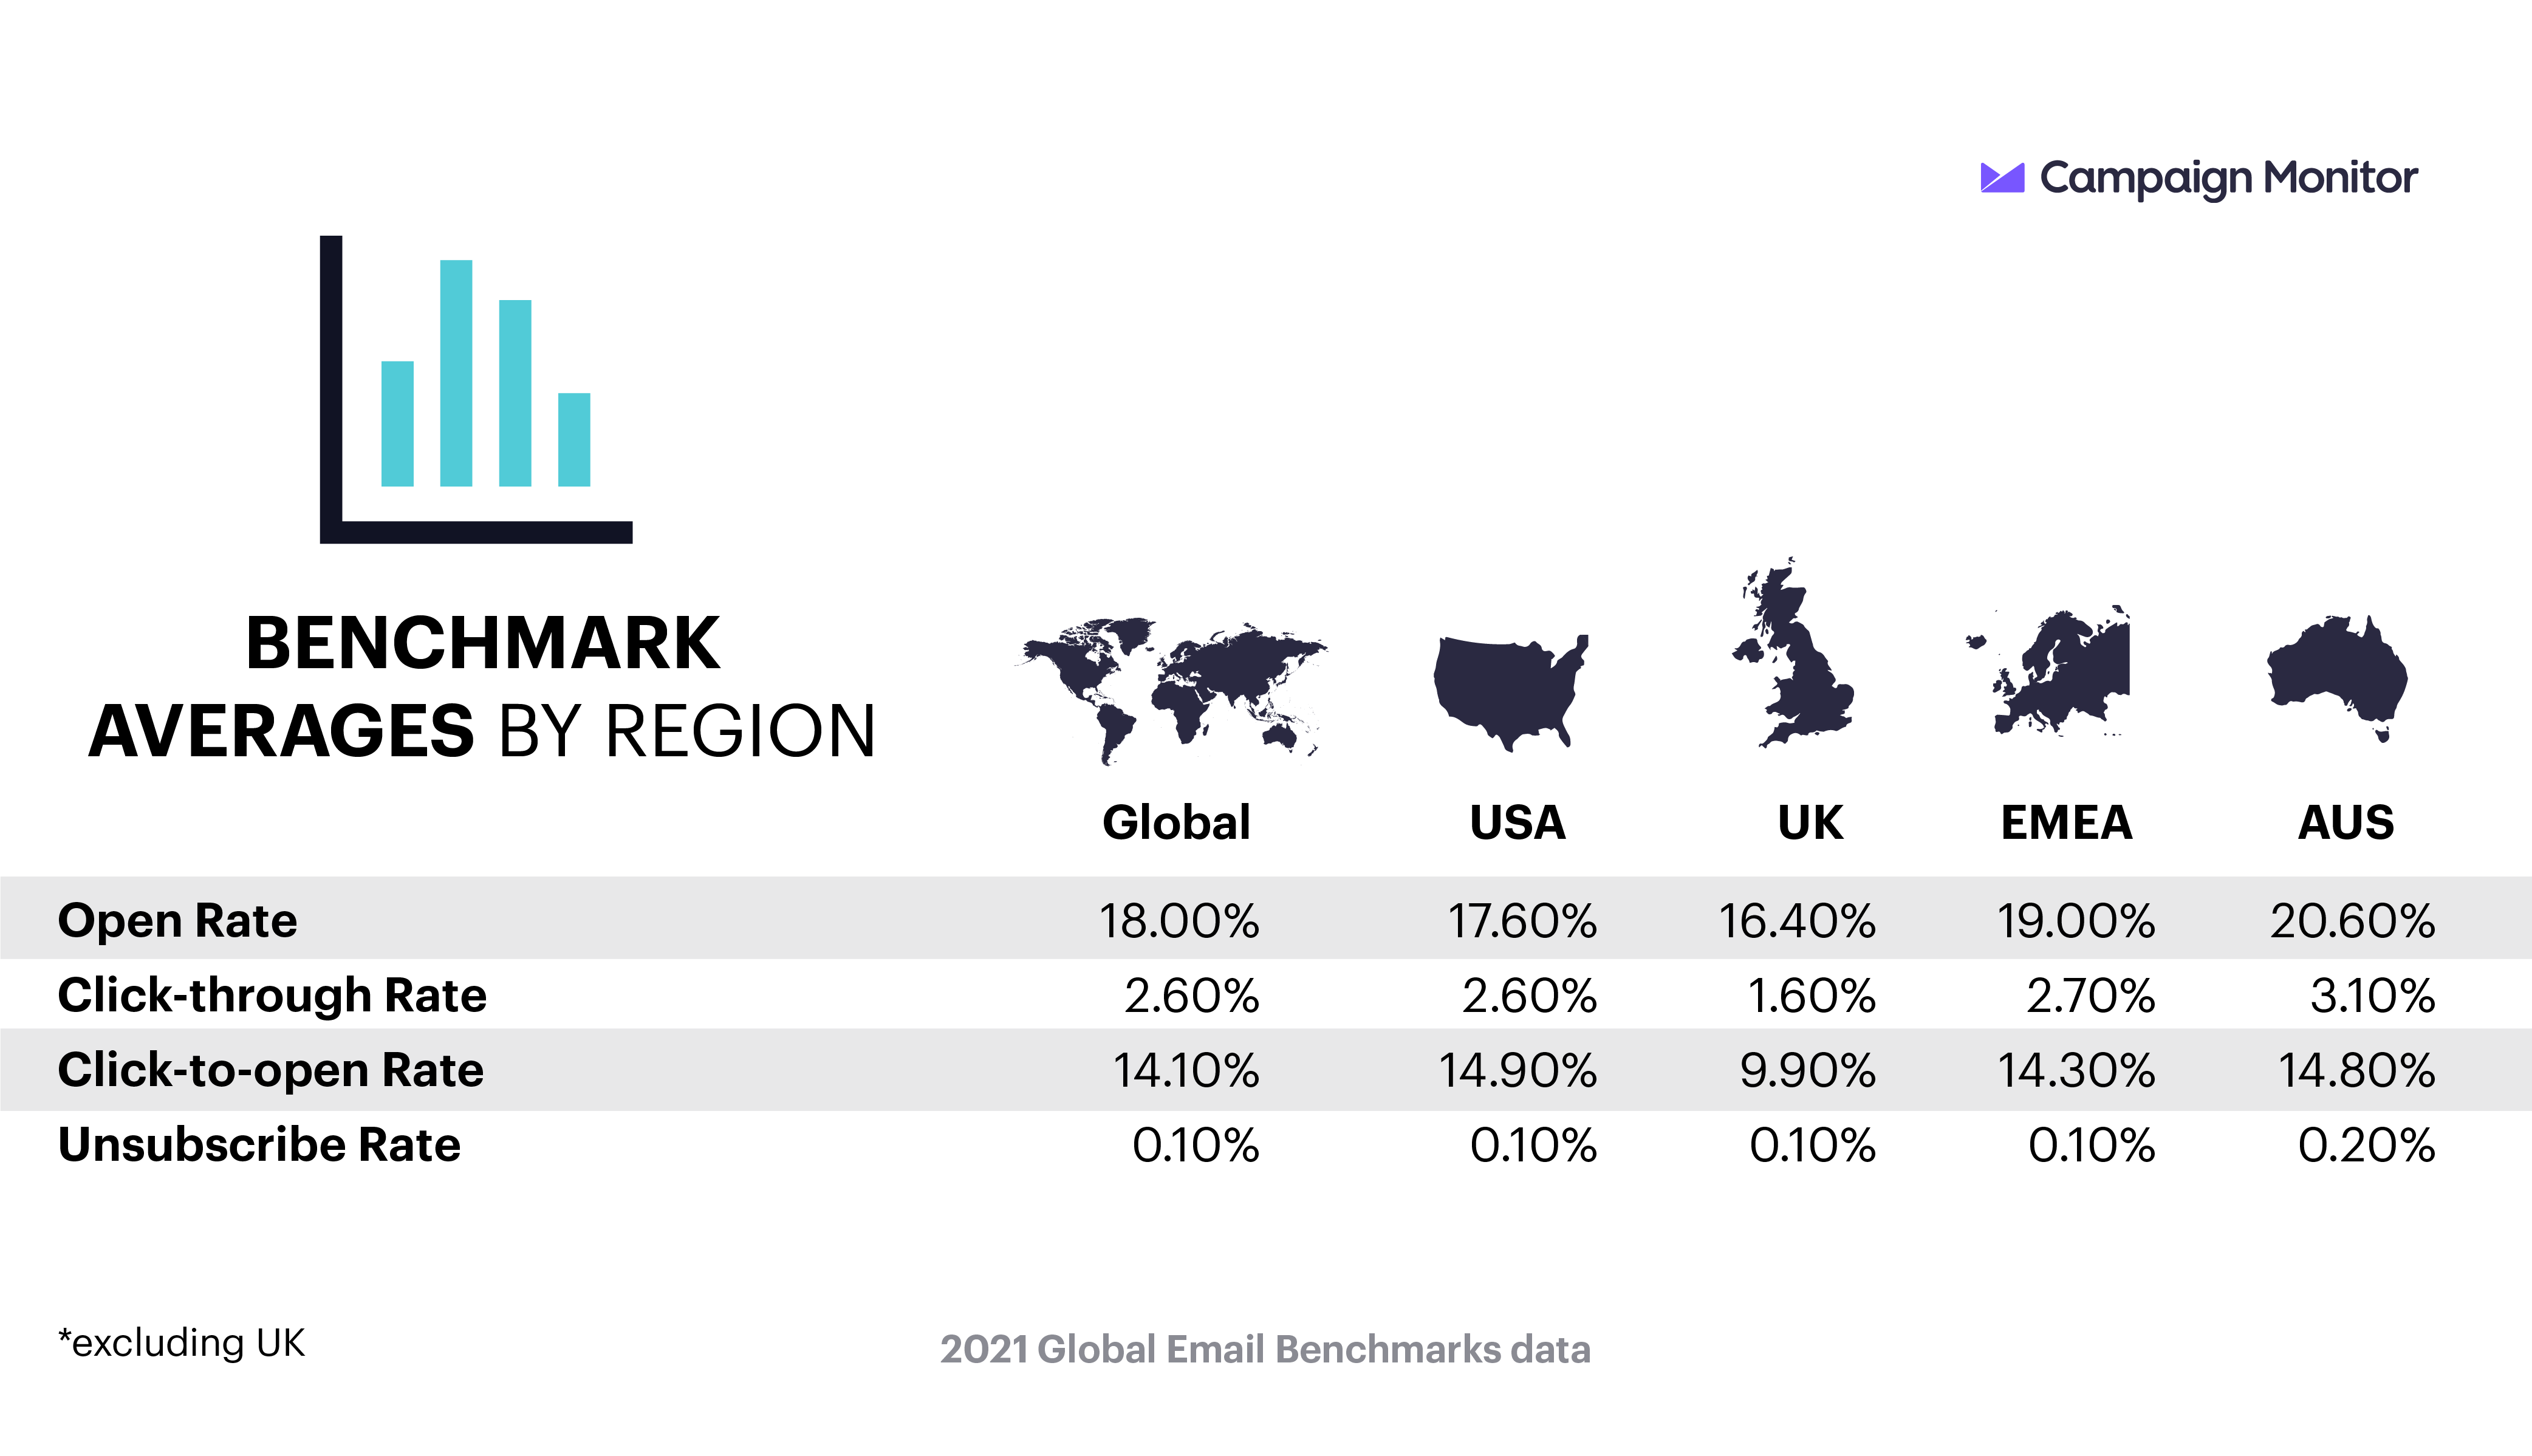 Global email marketing benchmarks by region